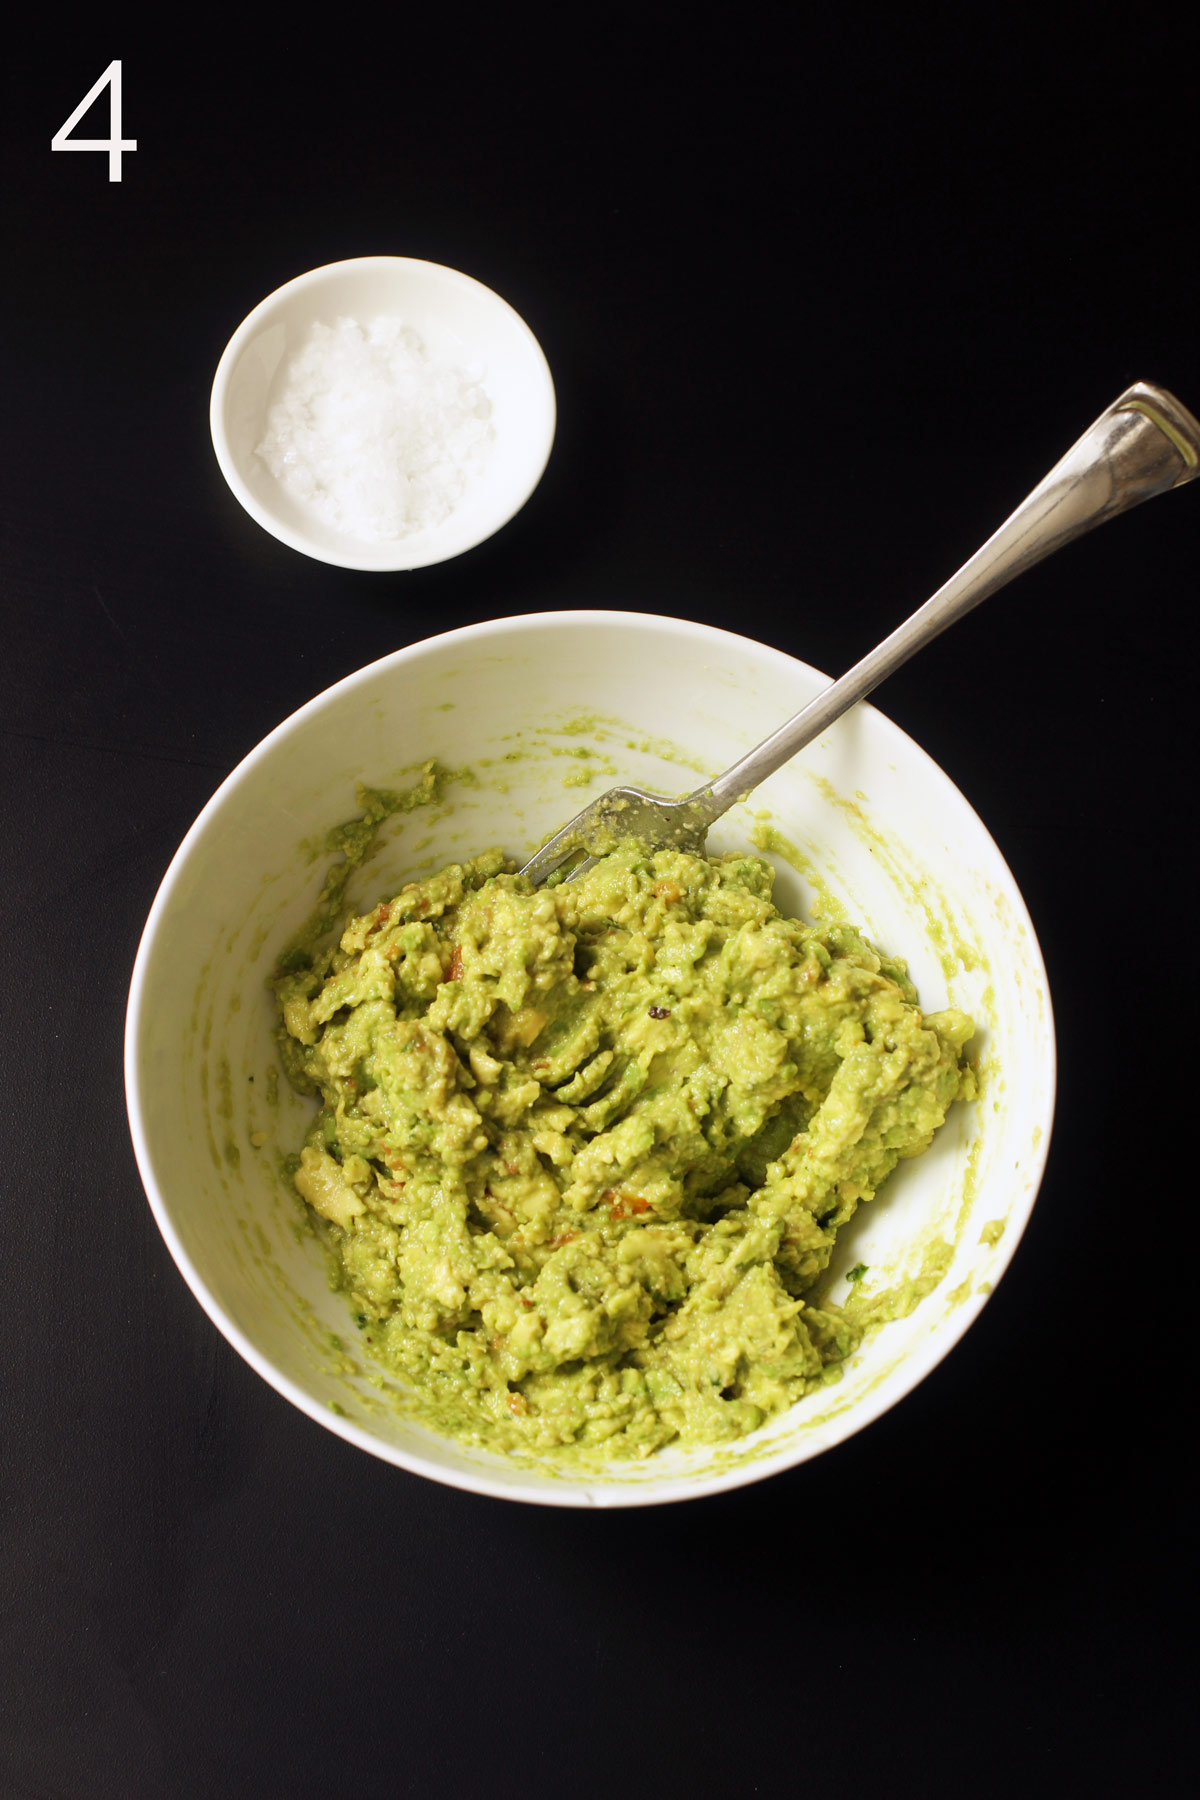 adjusting seasoning and texture of guacamole with fork